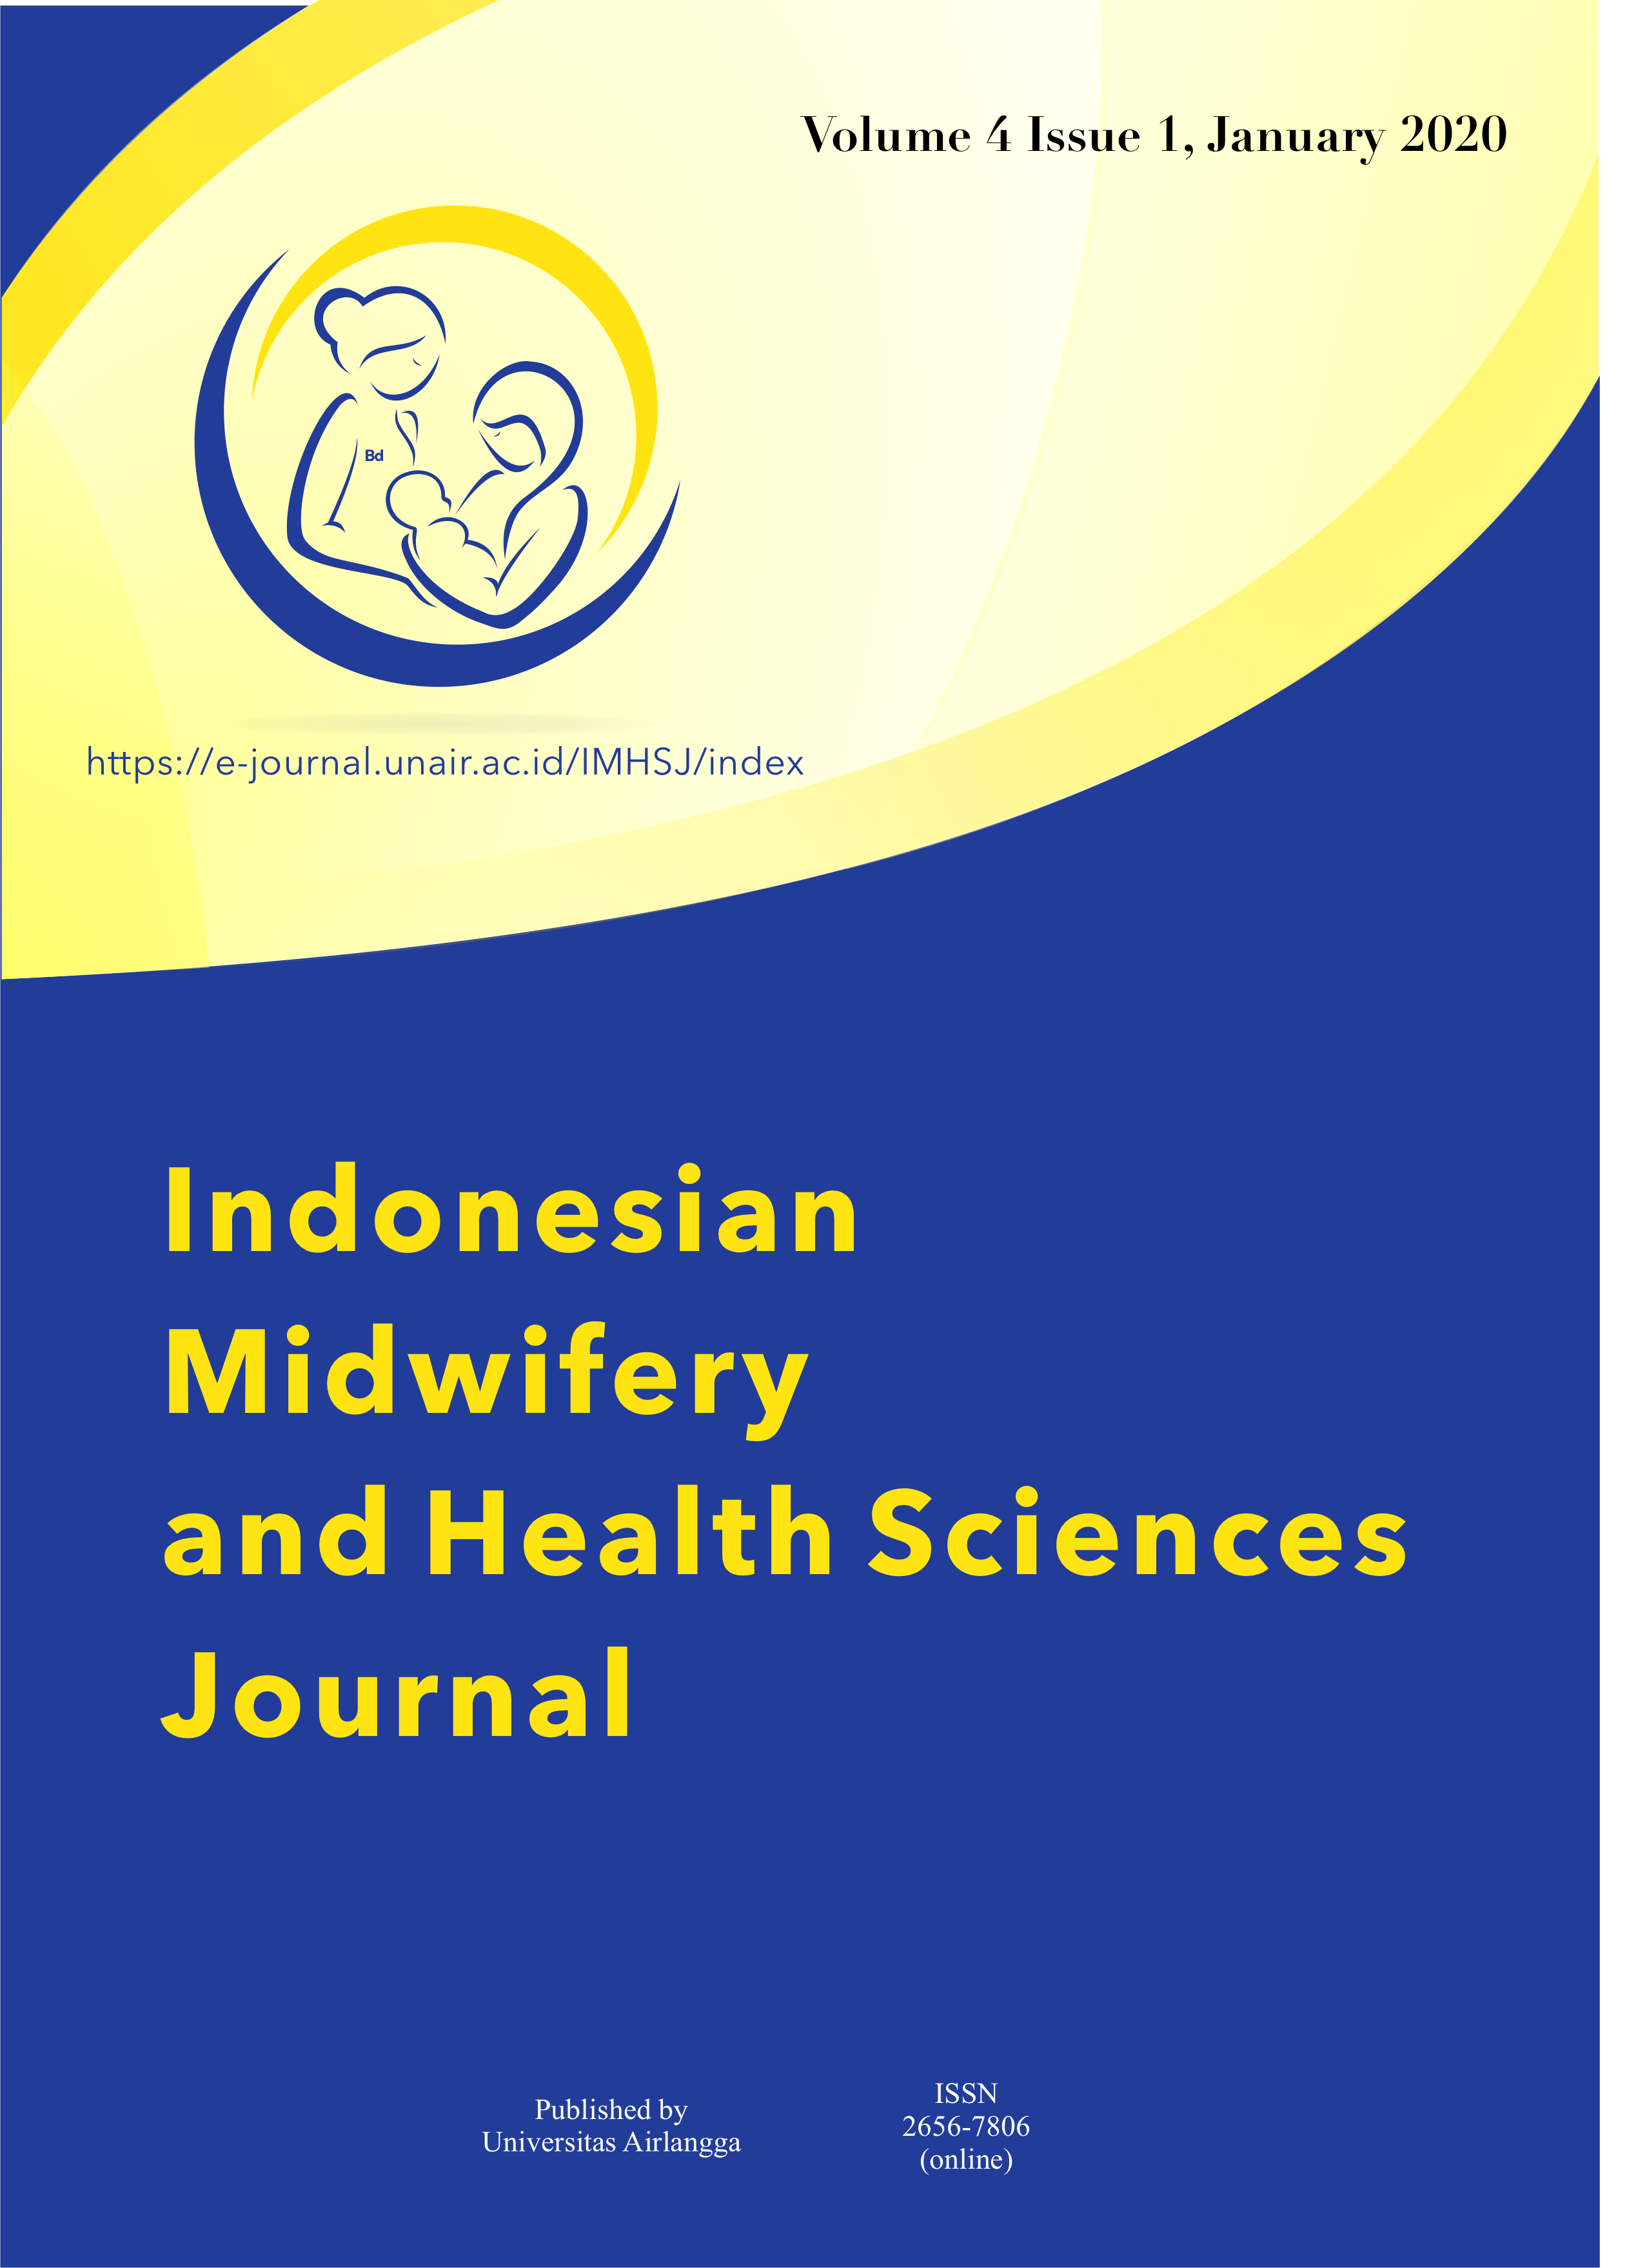 						View Vol. 4 No. 1 (2020): Indonesian Midwifery and Health Sciences Journal, January 2020
					